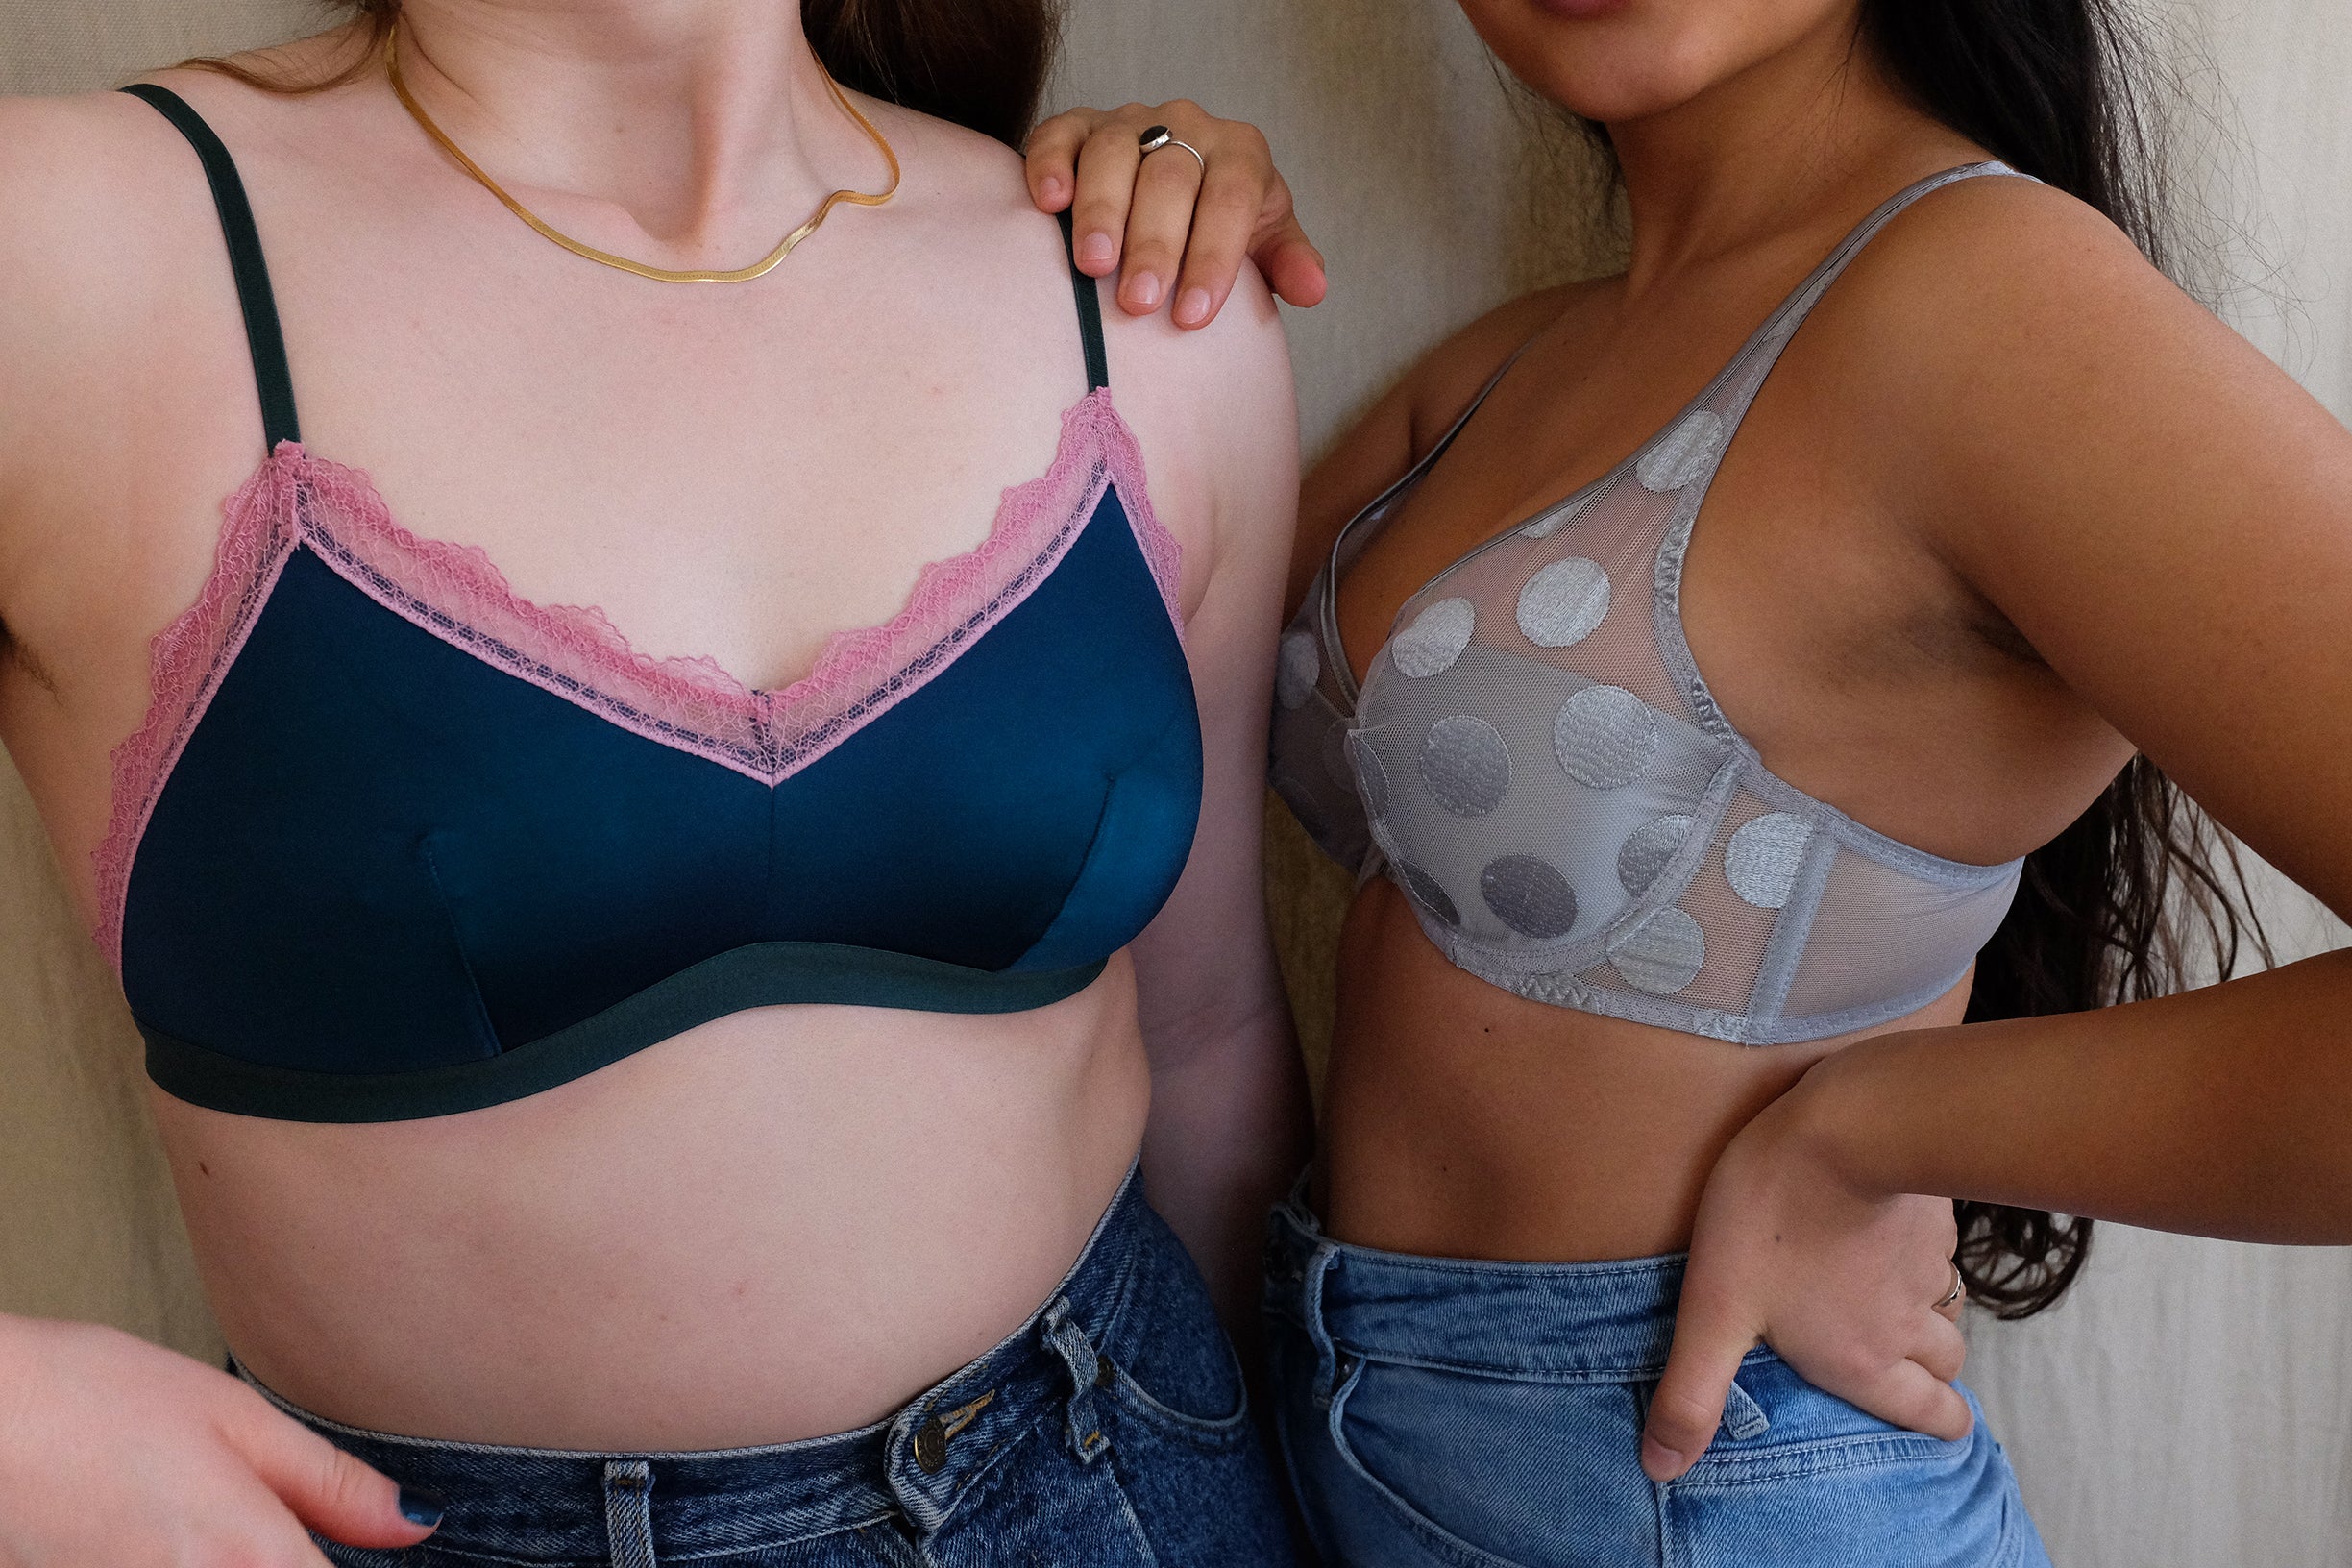 Can Women Really Connect with an Online Bra and Underwear Brand